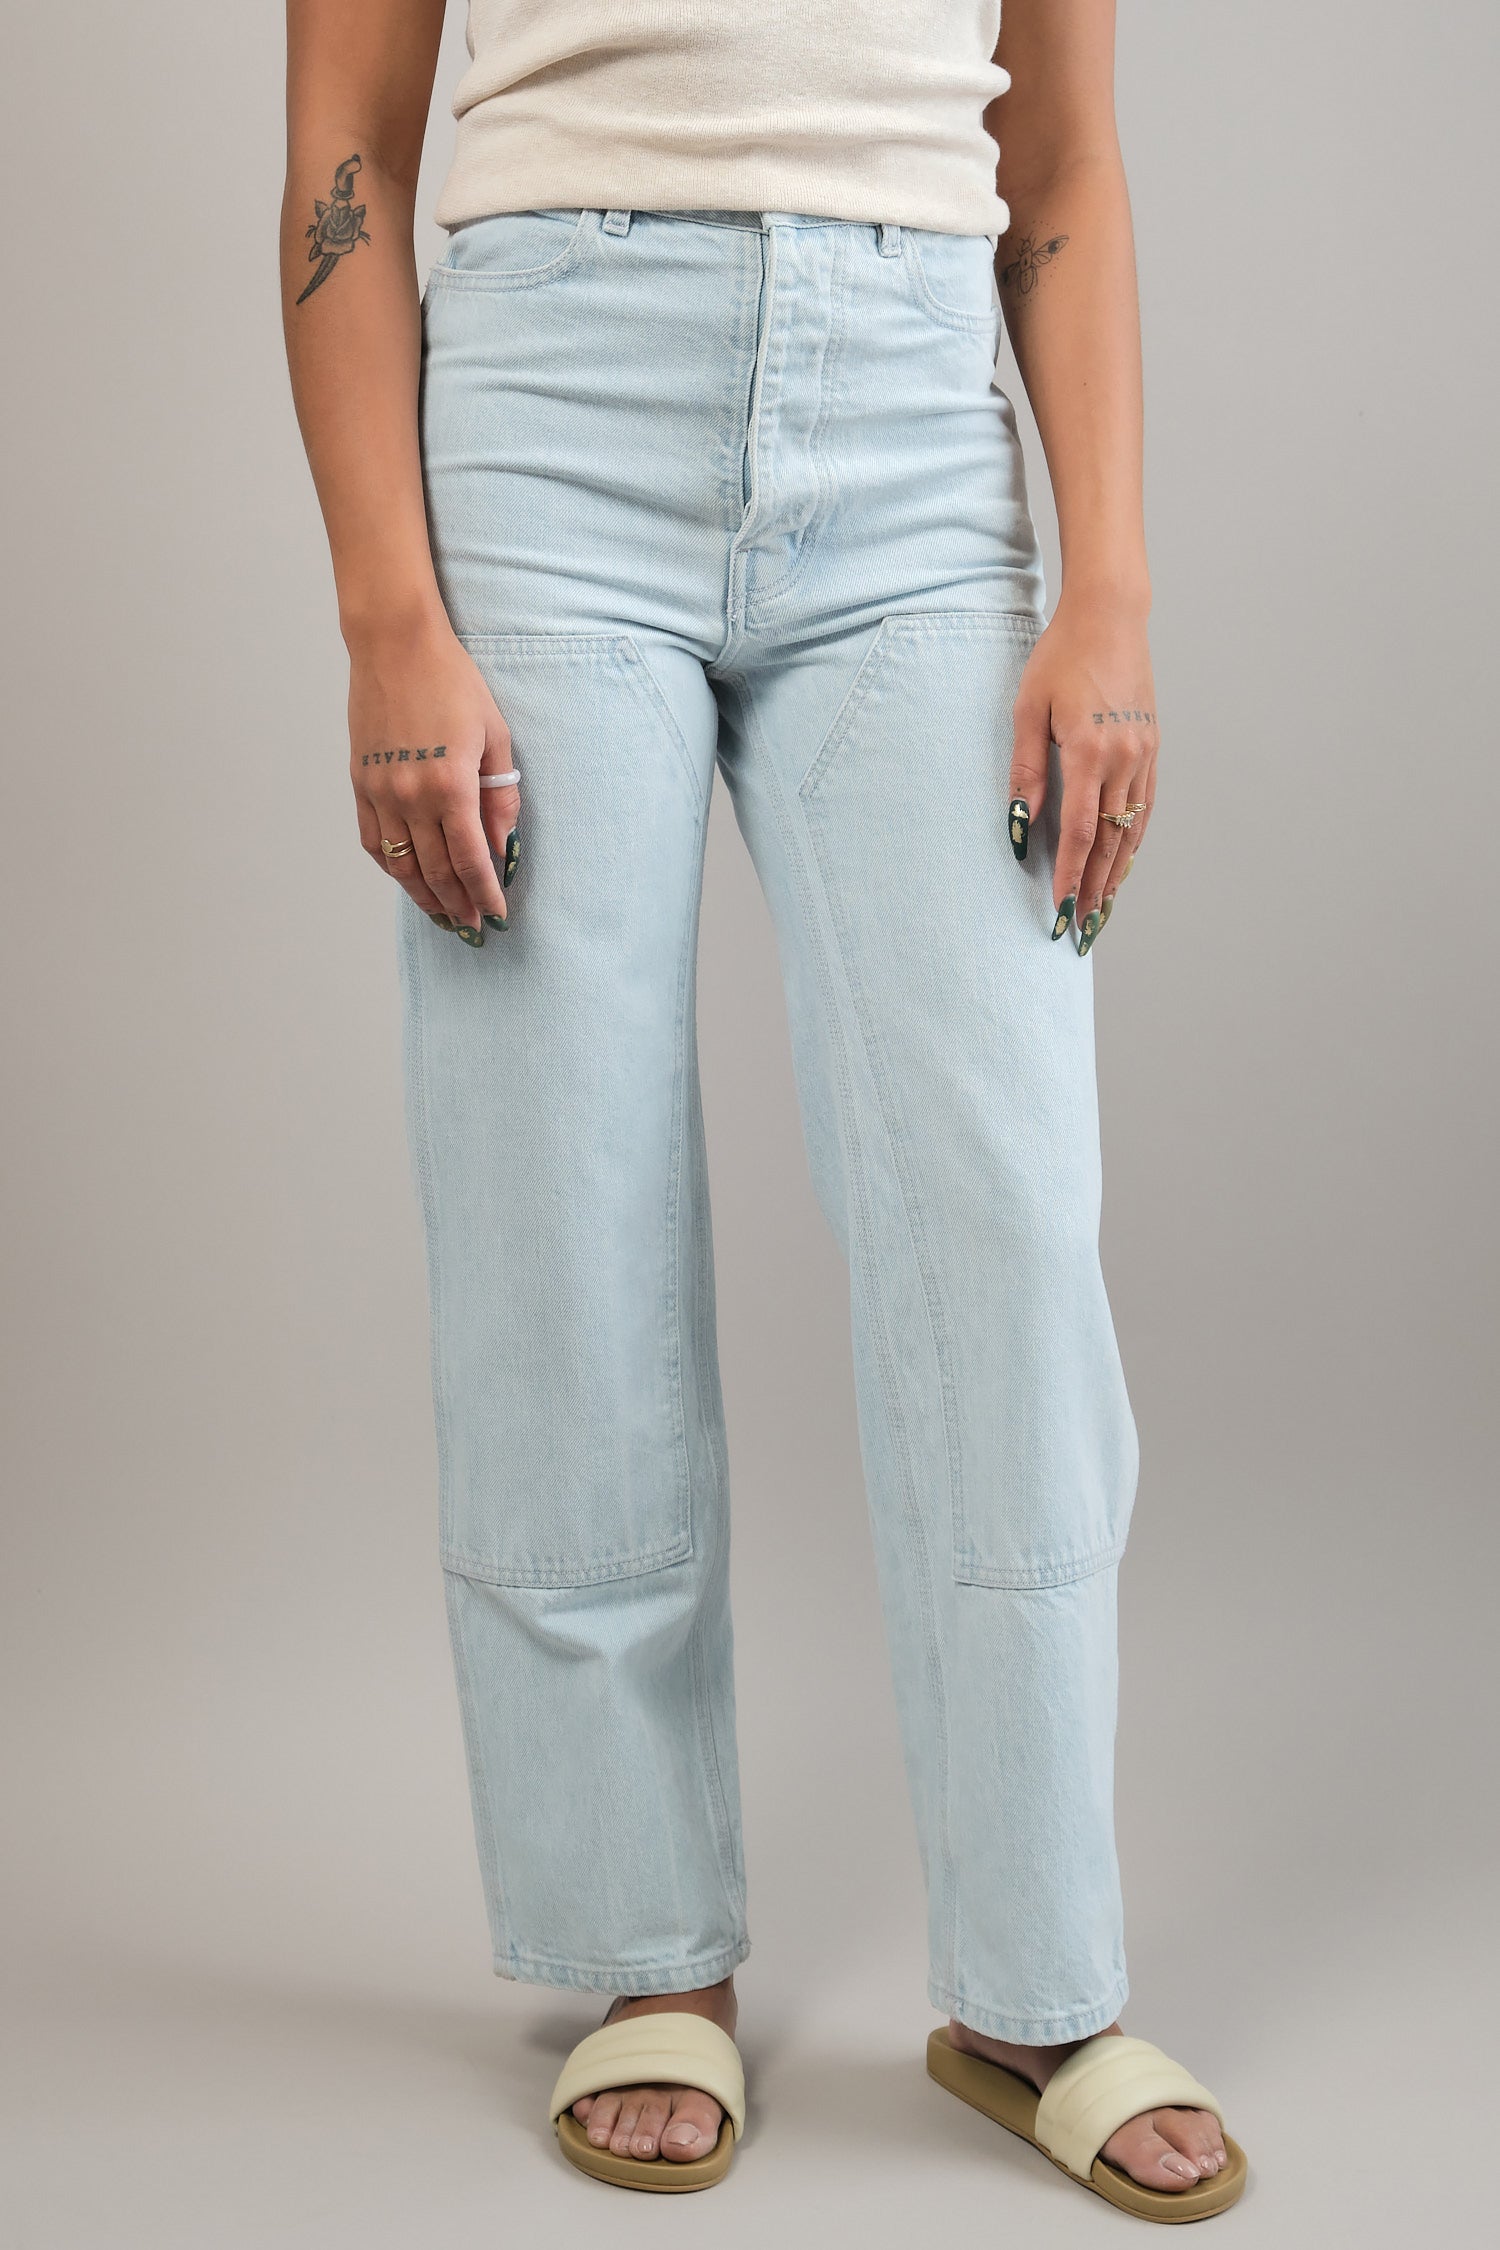 Patchfront Handy Pants in Pale Blue